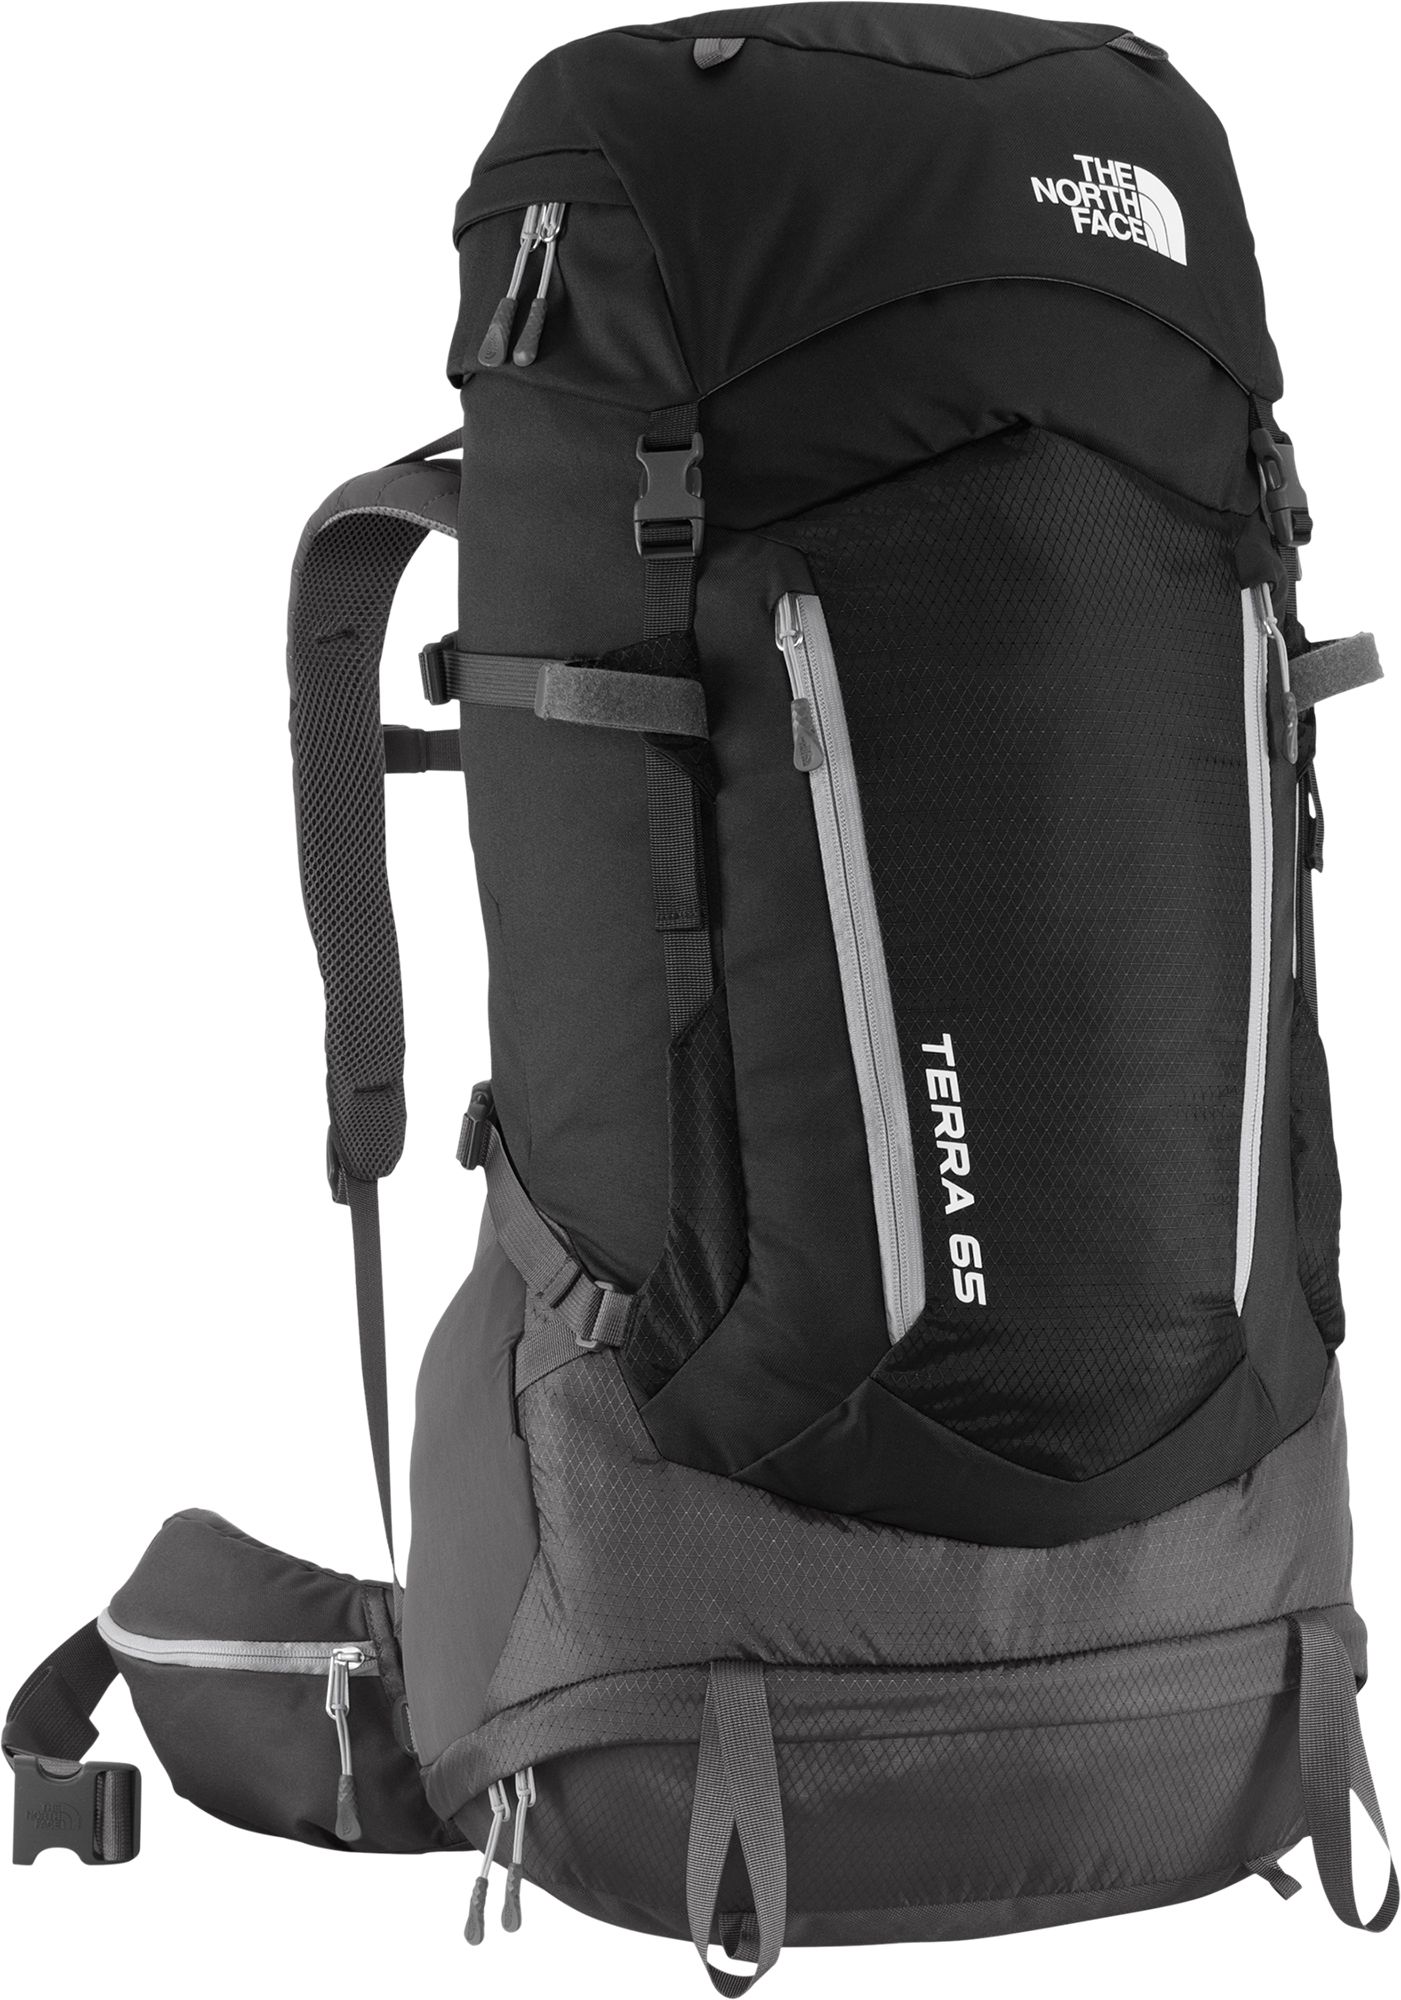 north face terra 65 review 